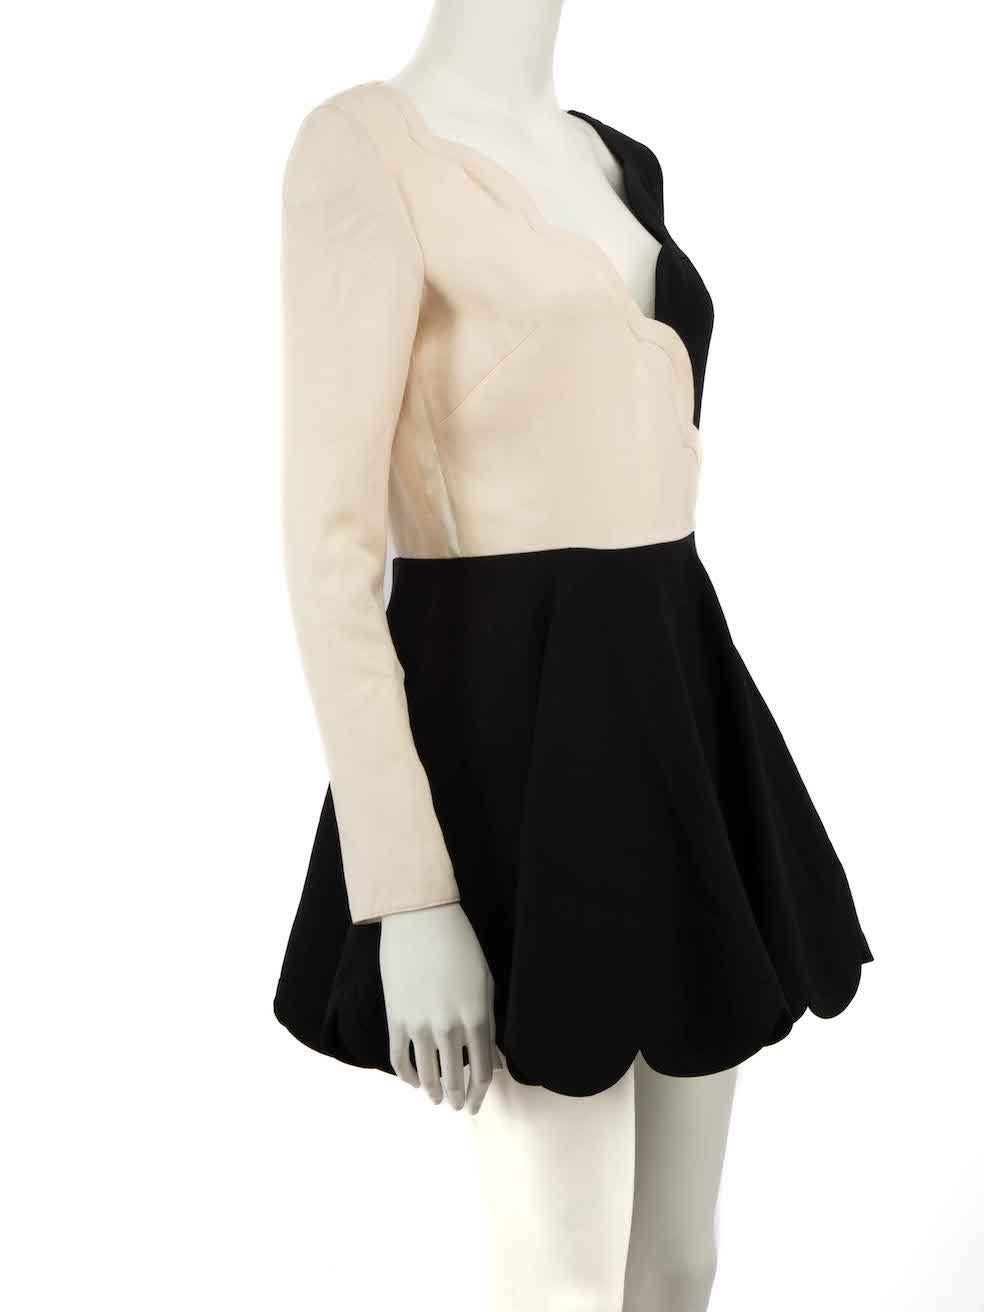 CONDITION is Good. General wear to dress is evident. Moderate signs of wear to the white panels with discoloured marks on this used Valentino designer resale item.
 
 Details
 Black
 Wool
 Dress
 Long sleeves
 Mini
 Cream panel
 Scallop hem
 Back